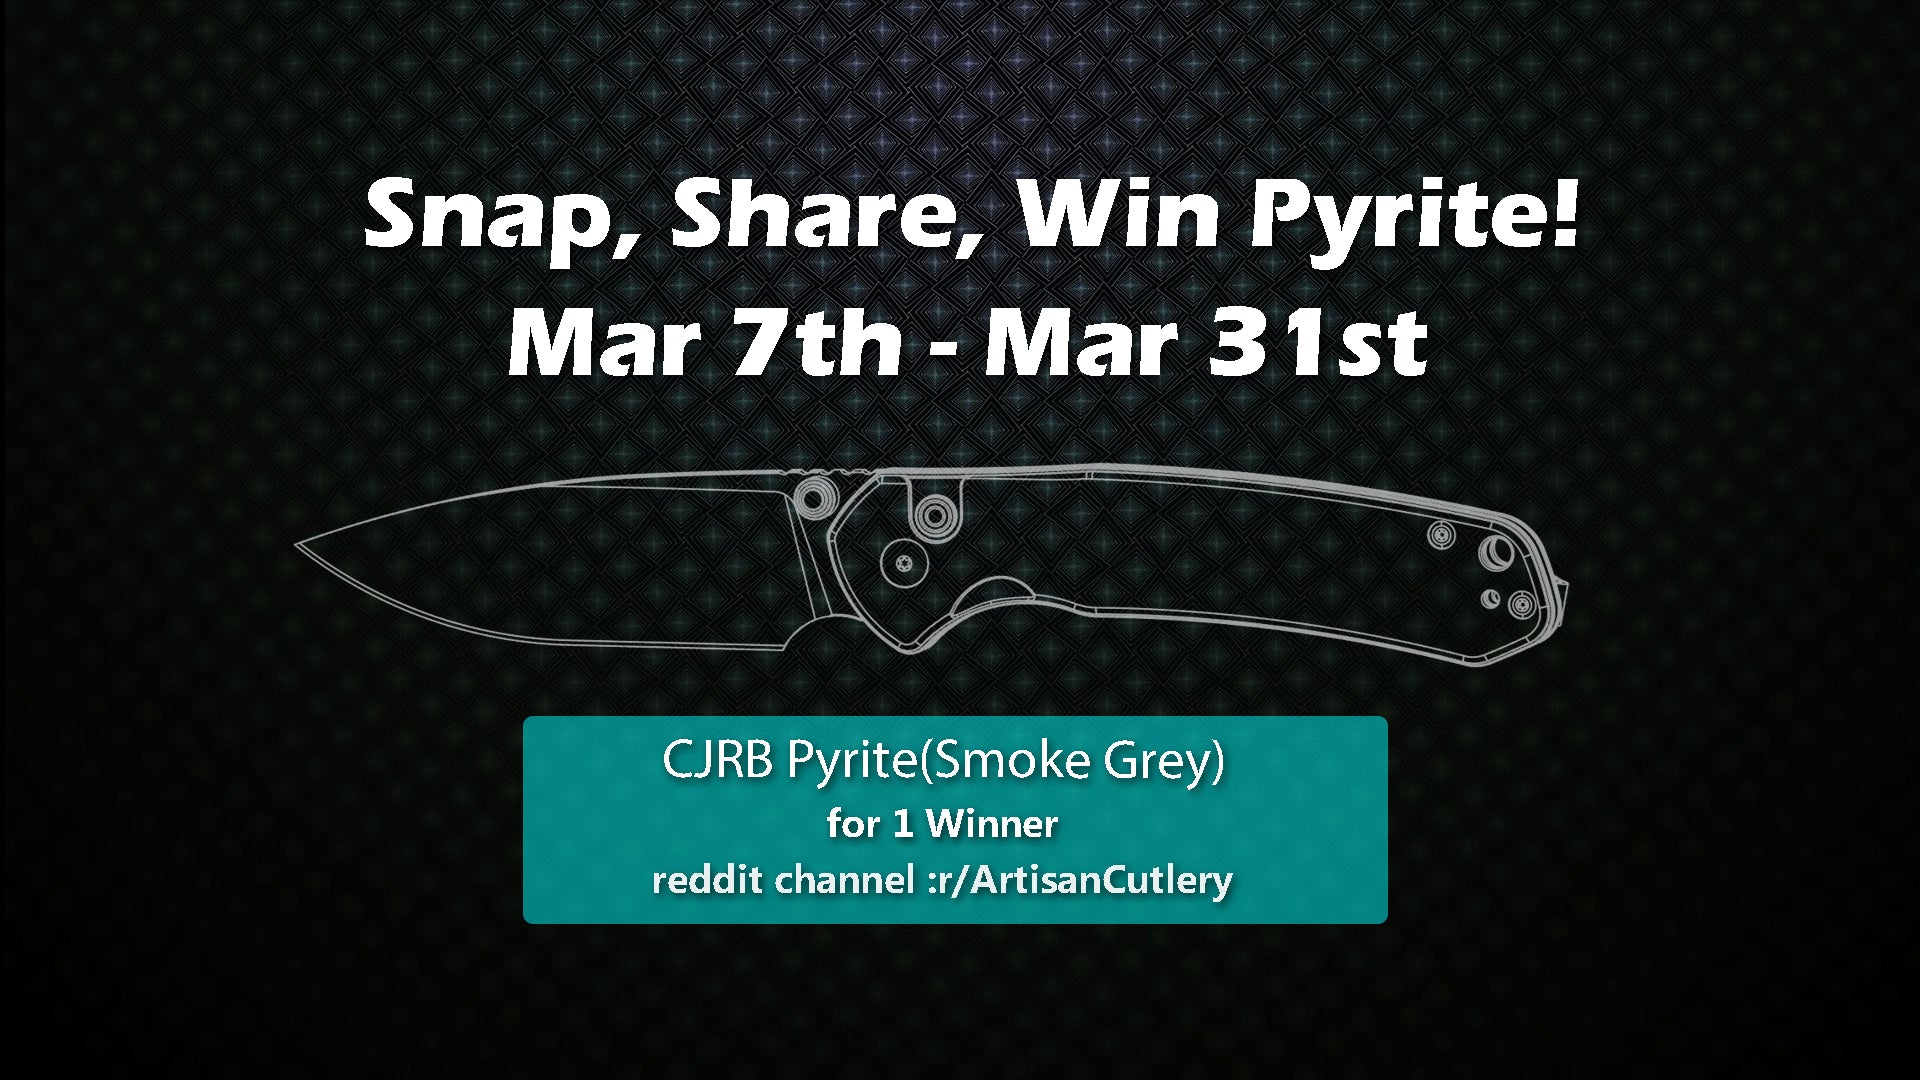 Snap, Share, and Win Pyrite!